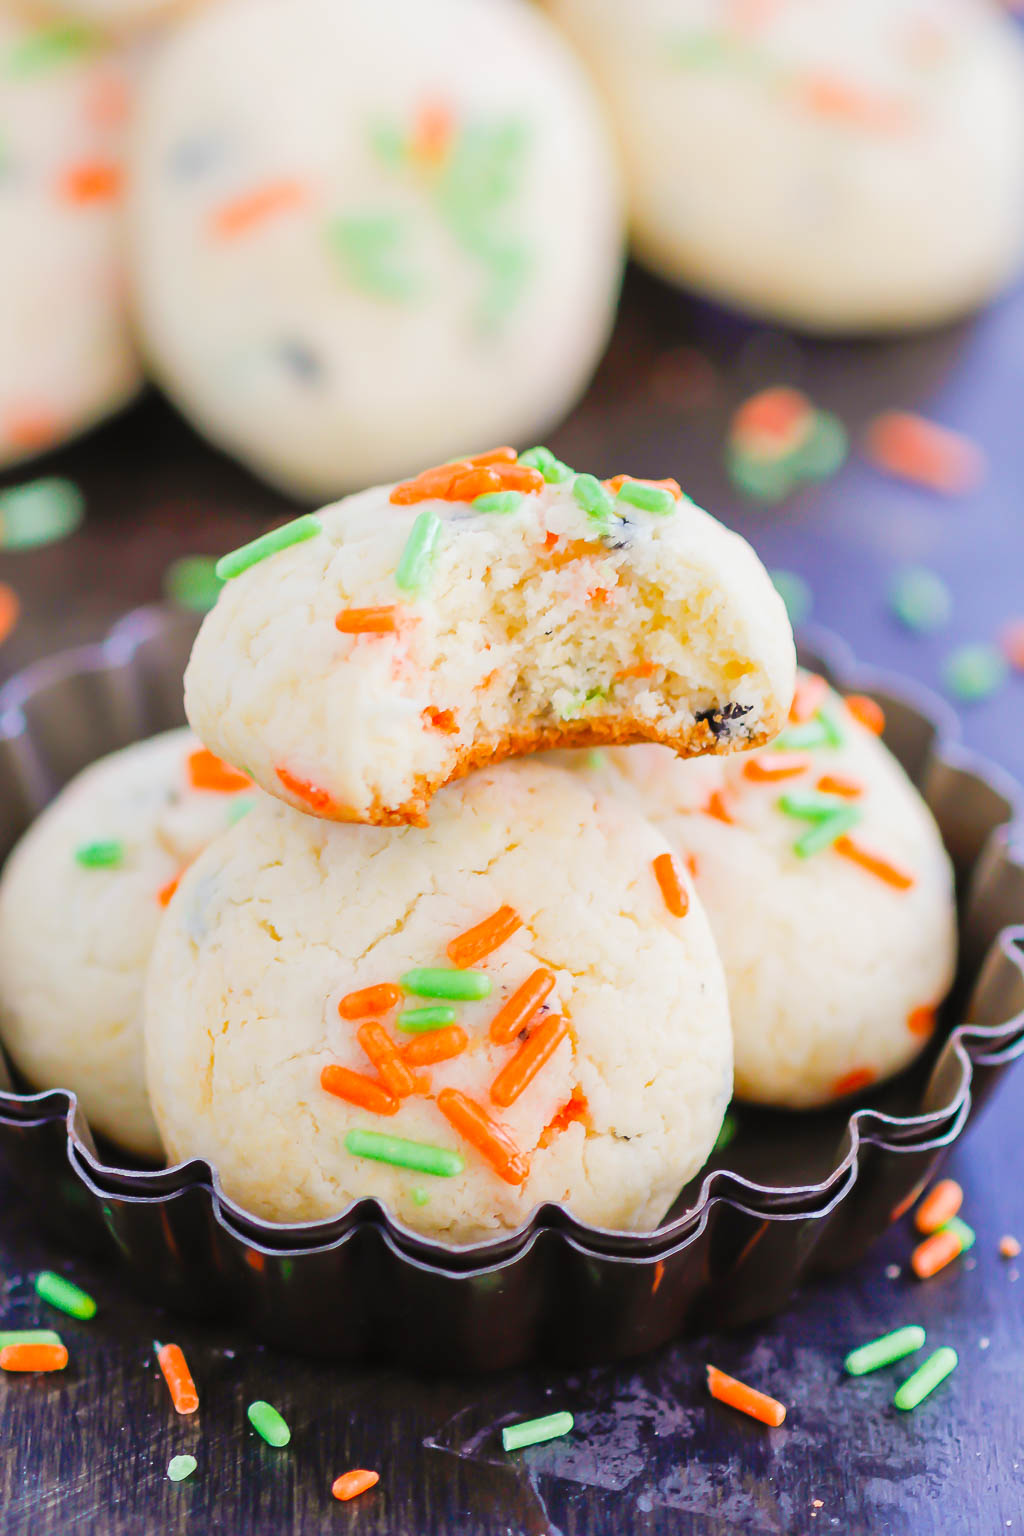 These Halloween Cookies are soft, fluffy, and made with just 4 ingredients. The sprinkles lend some Halloween fun and using cake mix makes it so easy. It's a simple recipe for a spooky night! #halloween #cookies #easy #homemade #spooky #simple #recipe #halloweenrecipes #cakemixcookies #cookierecipes